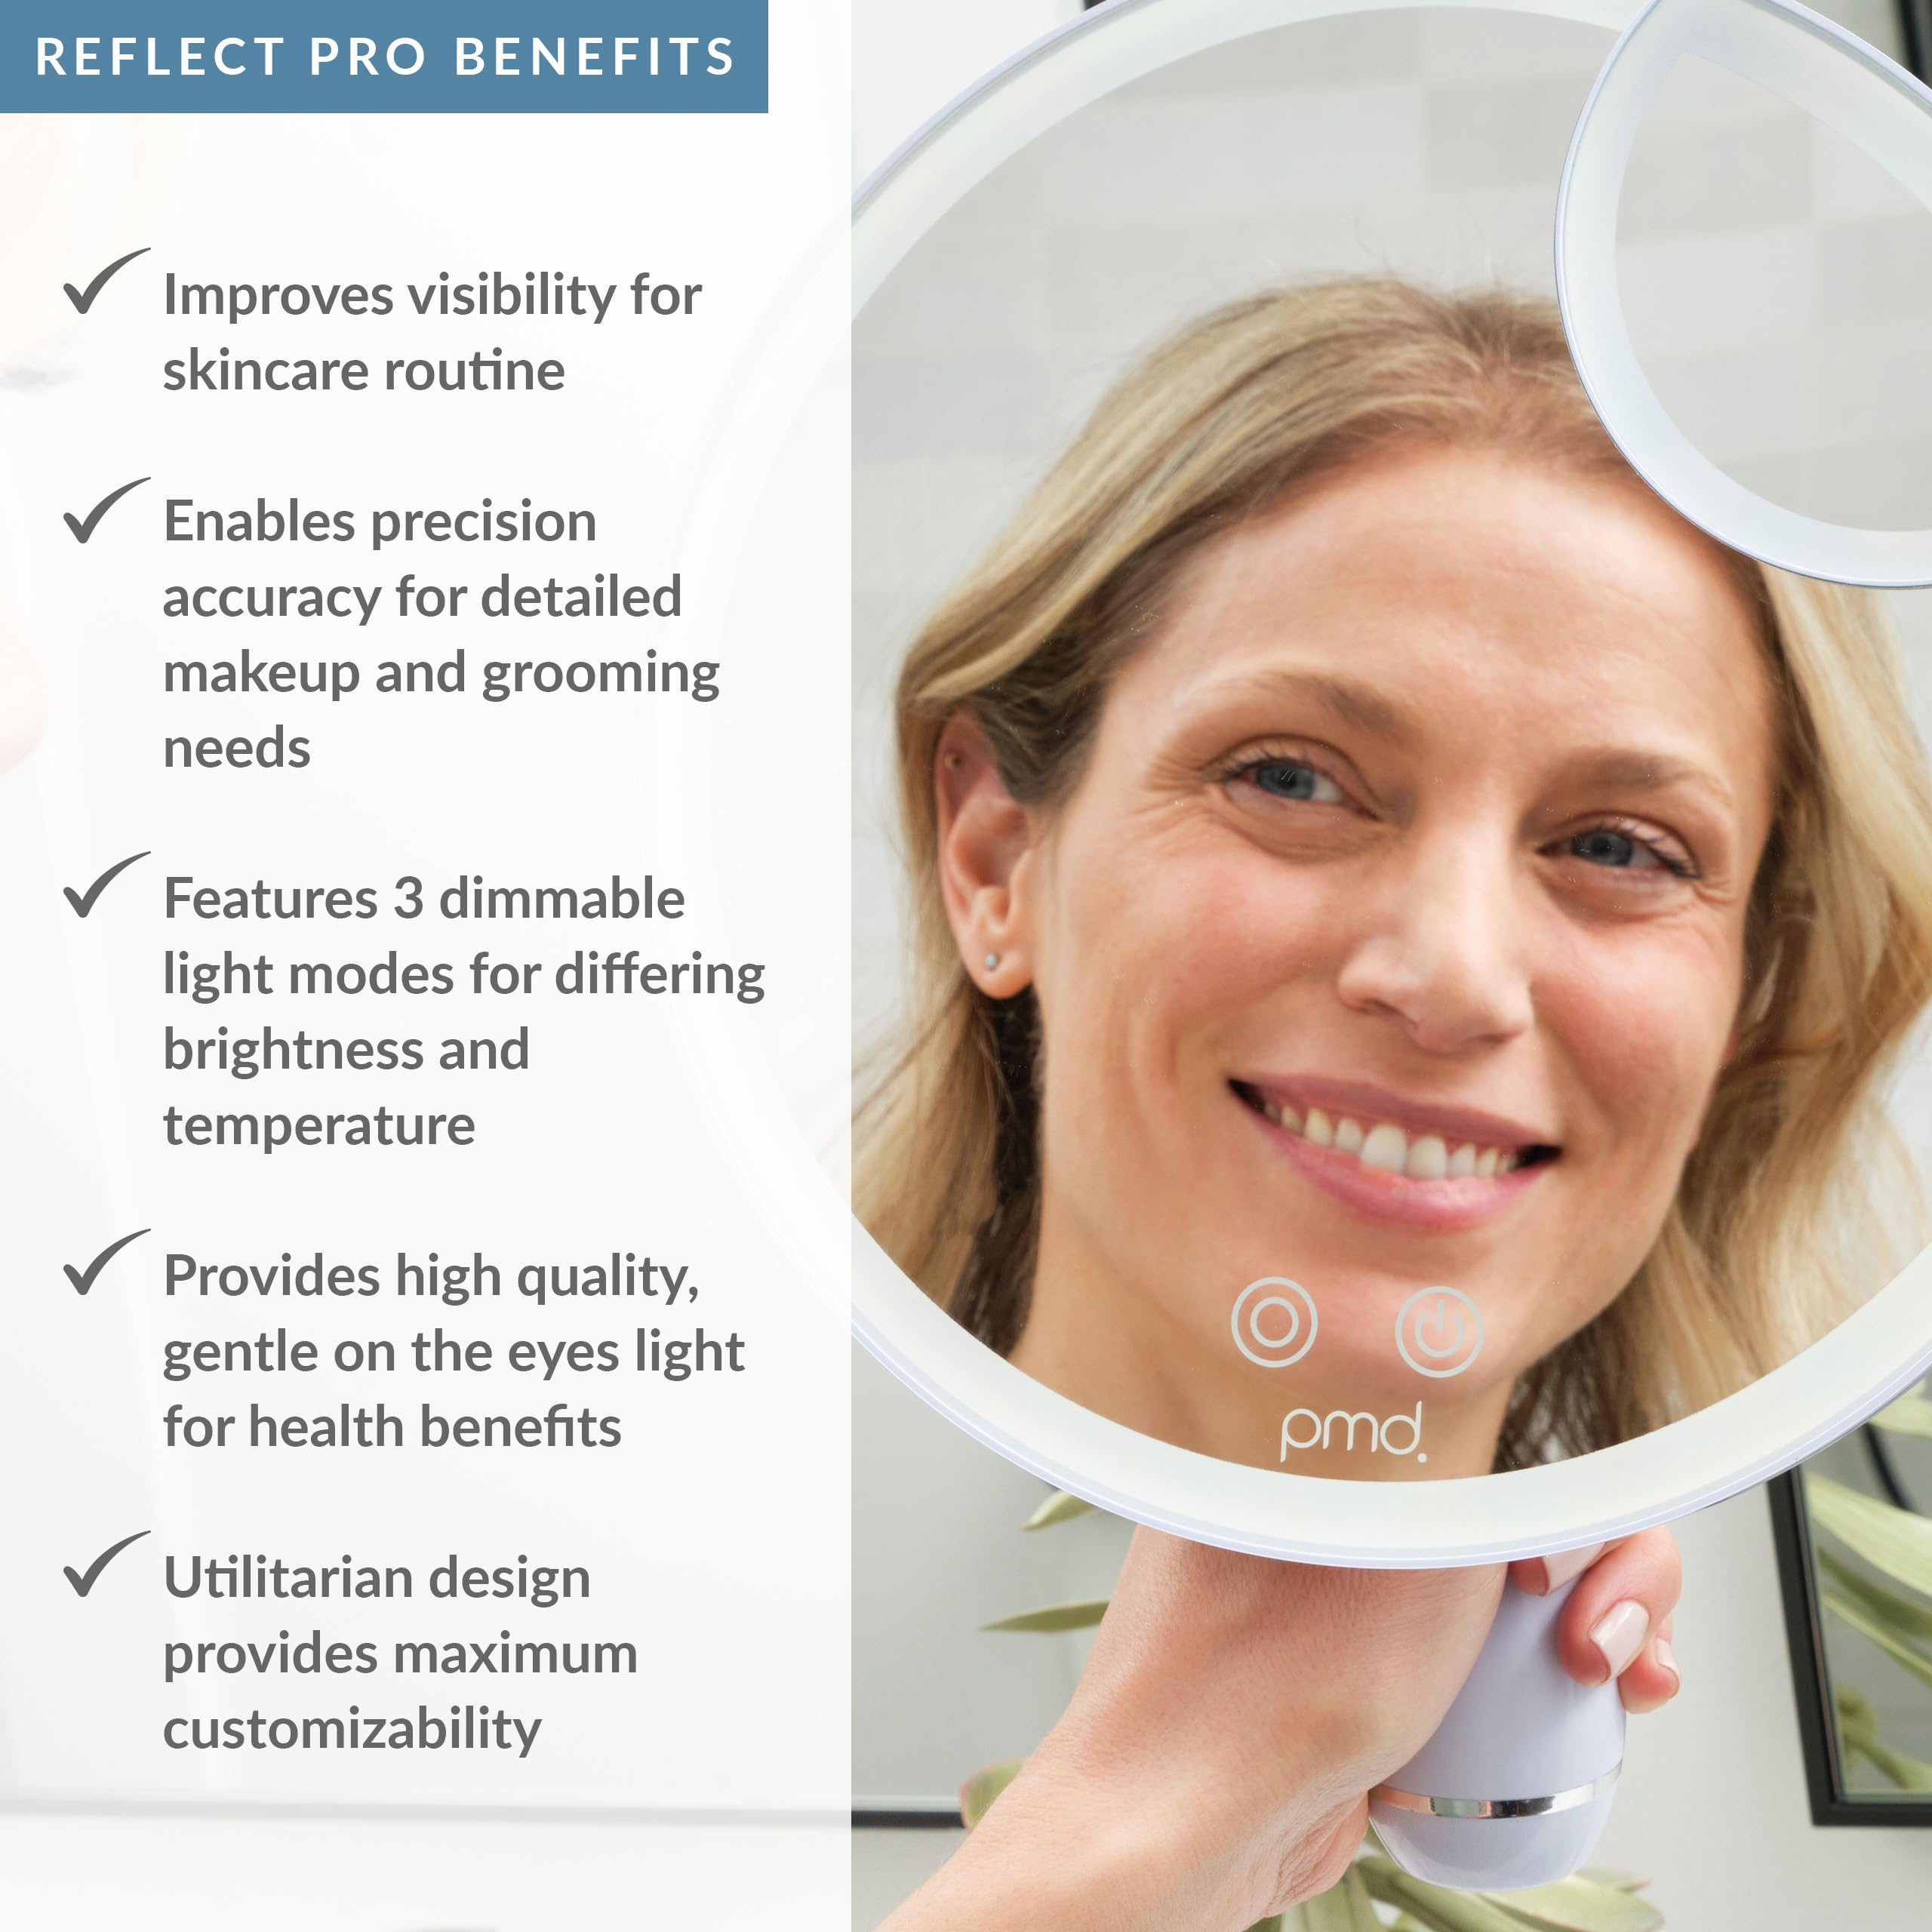 PMD Reflect Pro - Premium Beauty LED Mirror with TriLume Technology & Handheld Capabilities - Three Light Modes - 360° Rotation, 90° Tilt, & 5x Magnification - Travel Ready